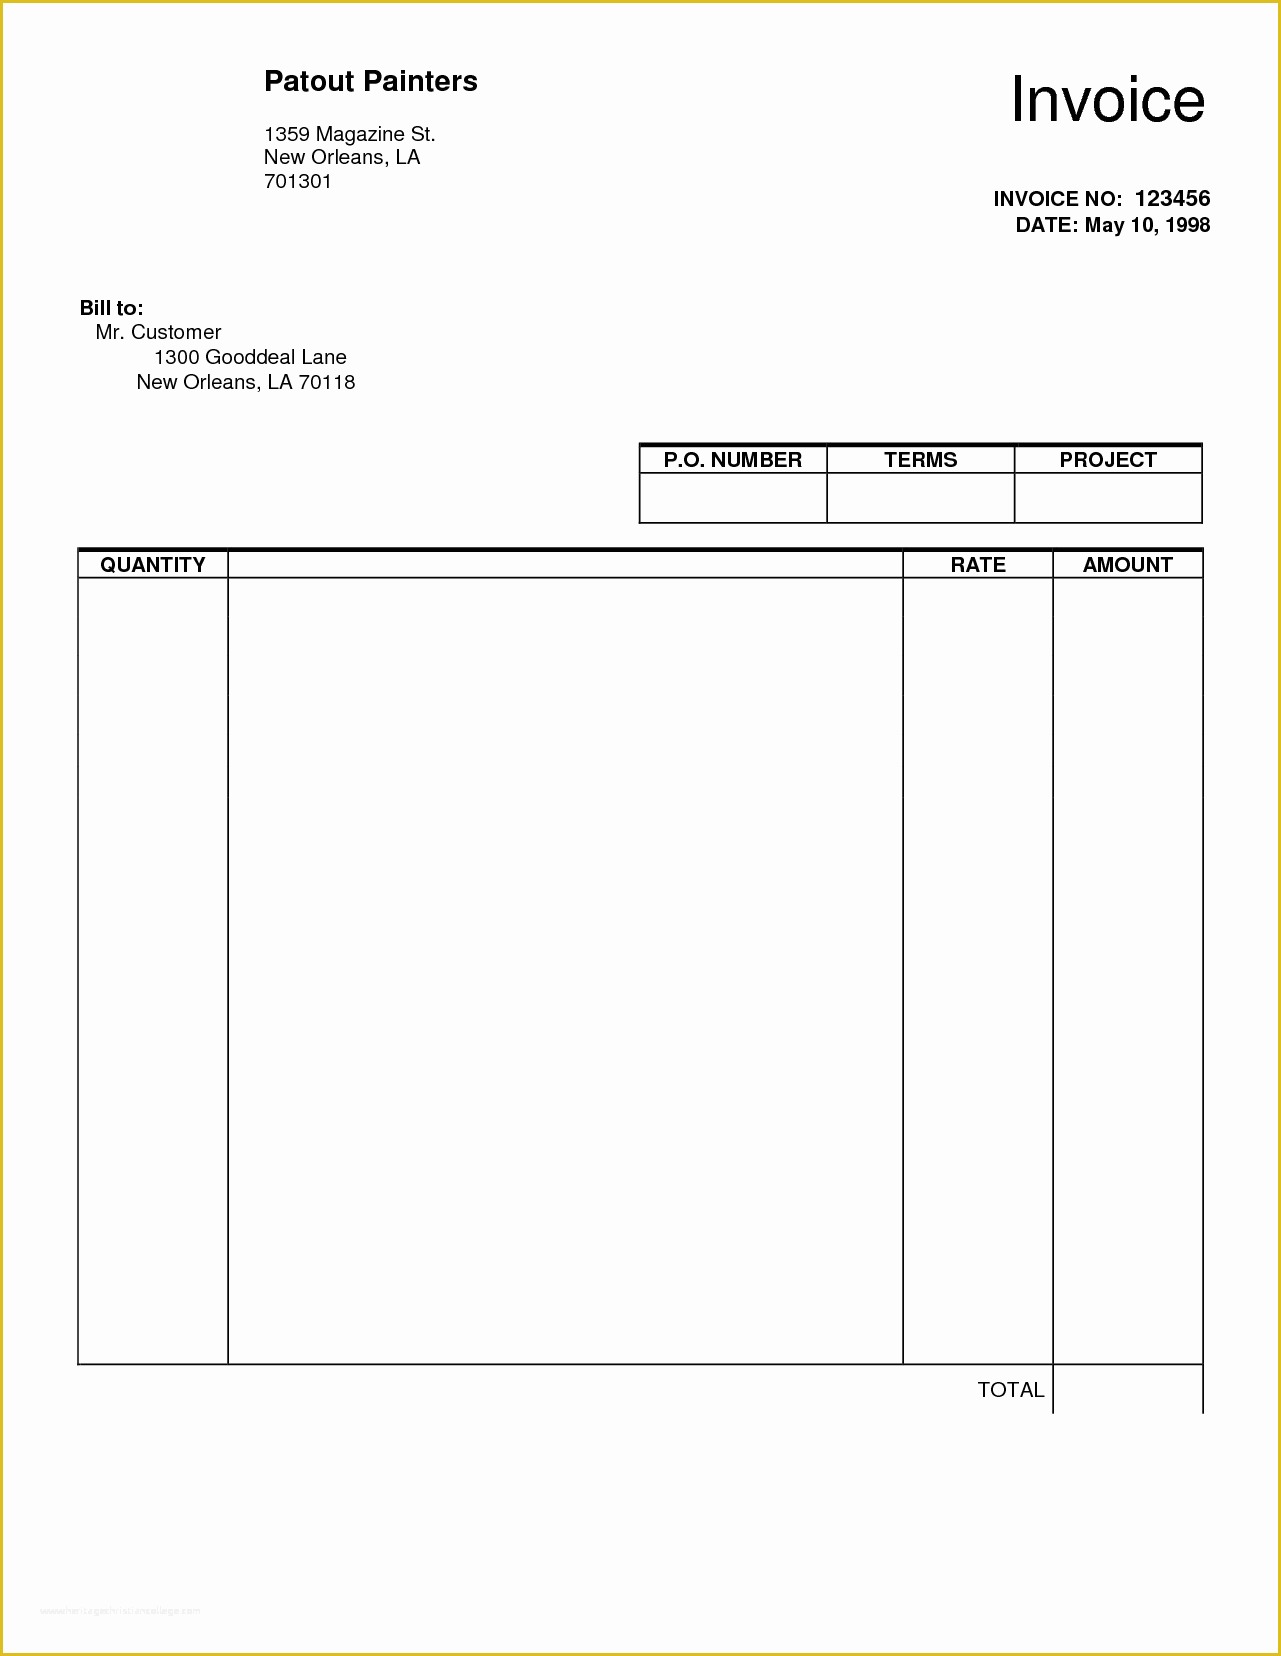 Fill In the Blank Invoice Template Free Of 8 Blank Invoice Template Pdf